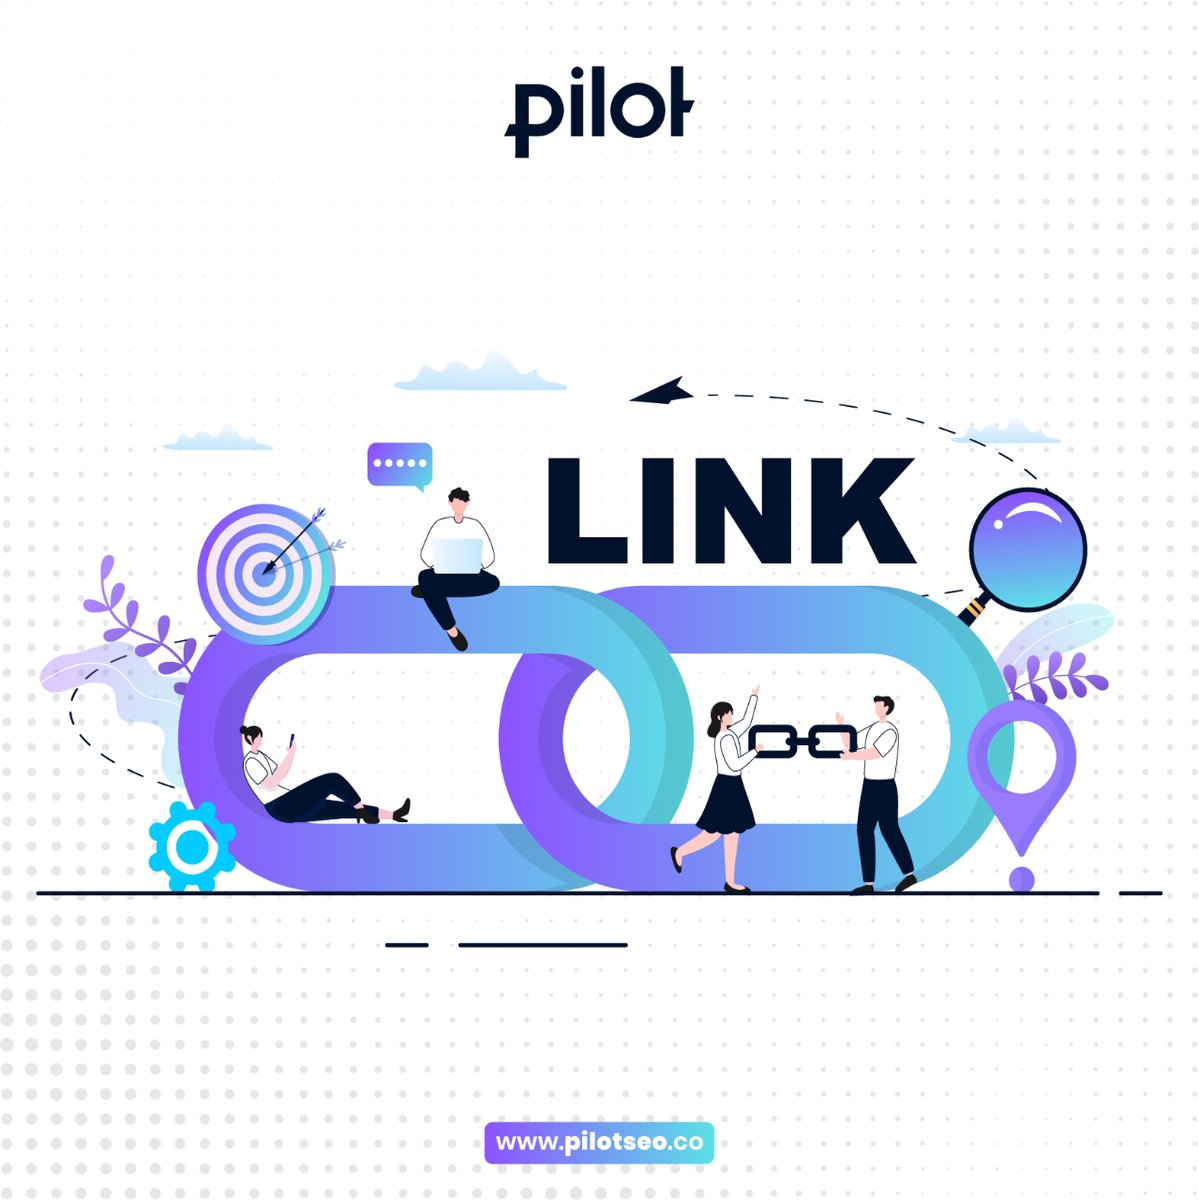 Quality over quantity! Pilot focuses on relevant, high-quality backlinks to improve your website's authority and trustworthiness. 🔗 

#QualityBacklinks #PilotSEO